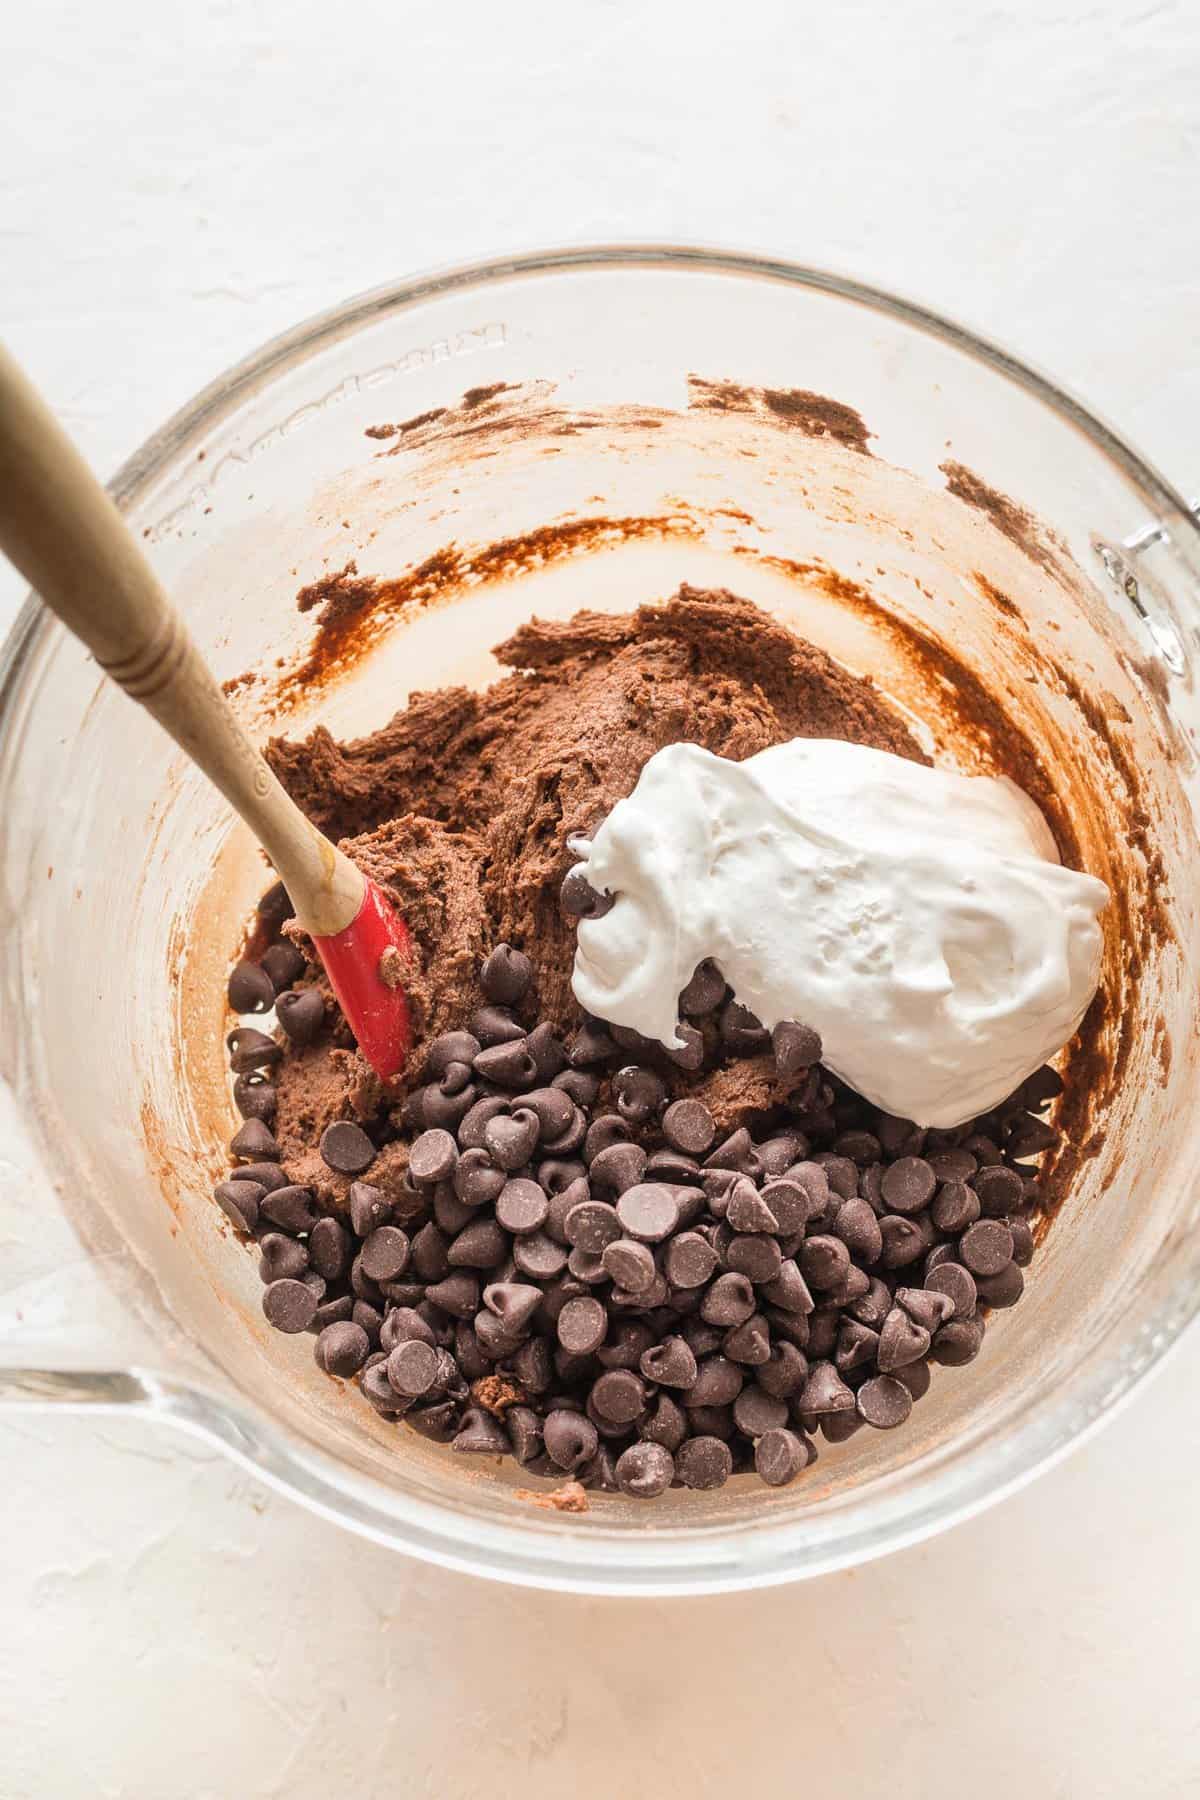 Chocolate chips and marshmallow fluff on top of chocolate cookie dough in a bowl.